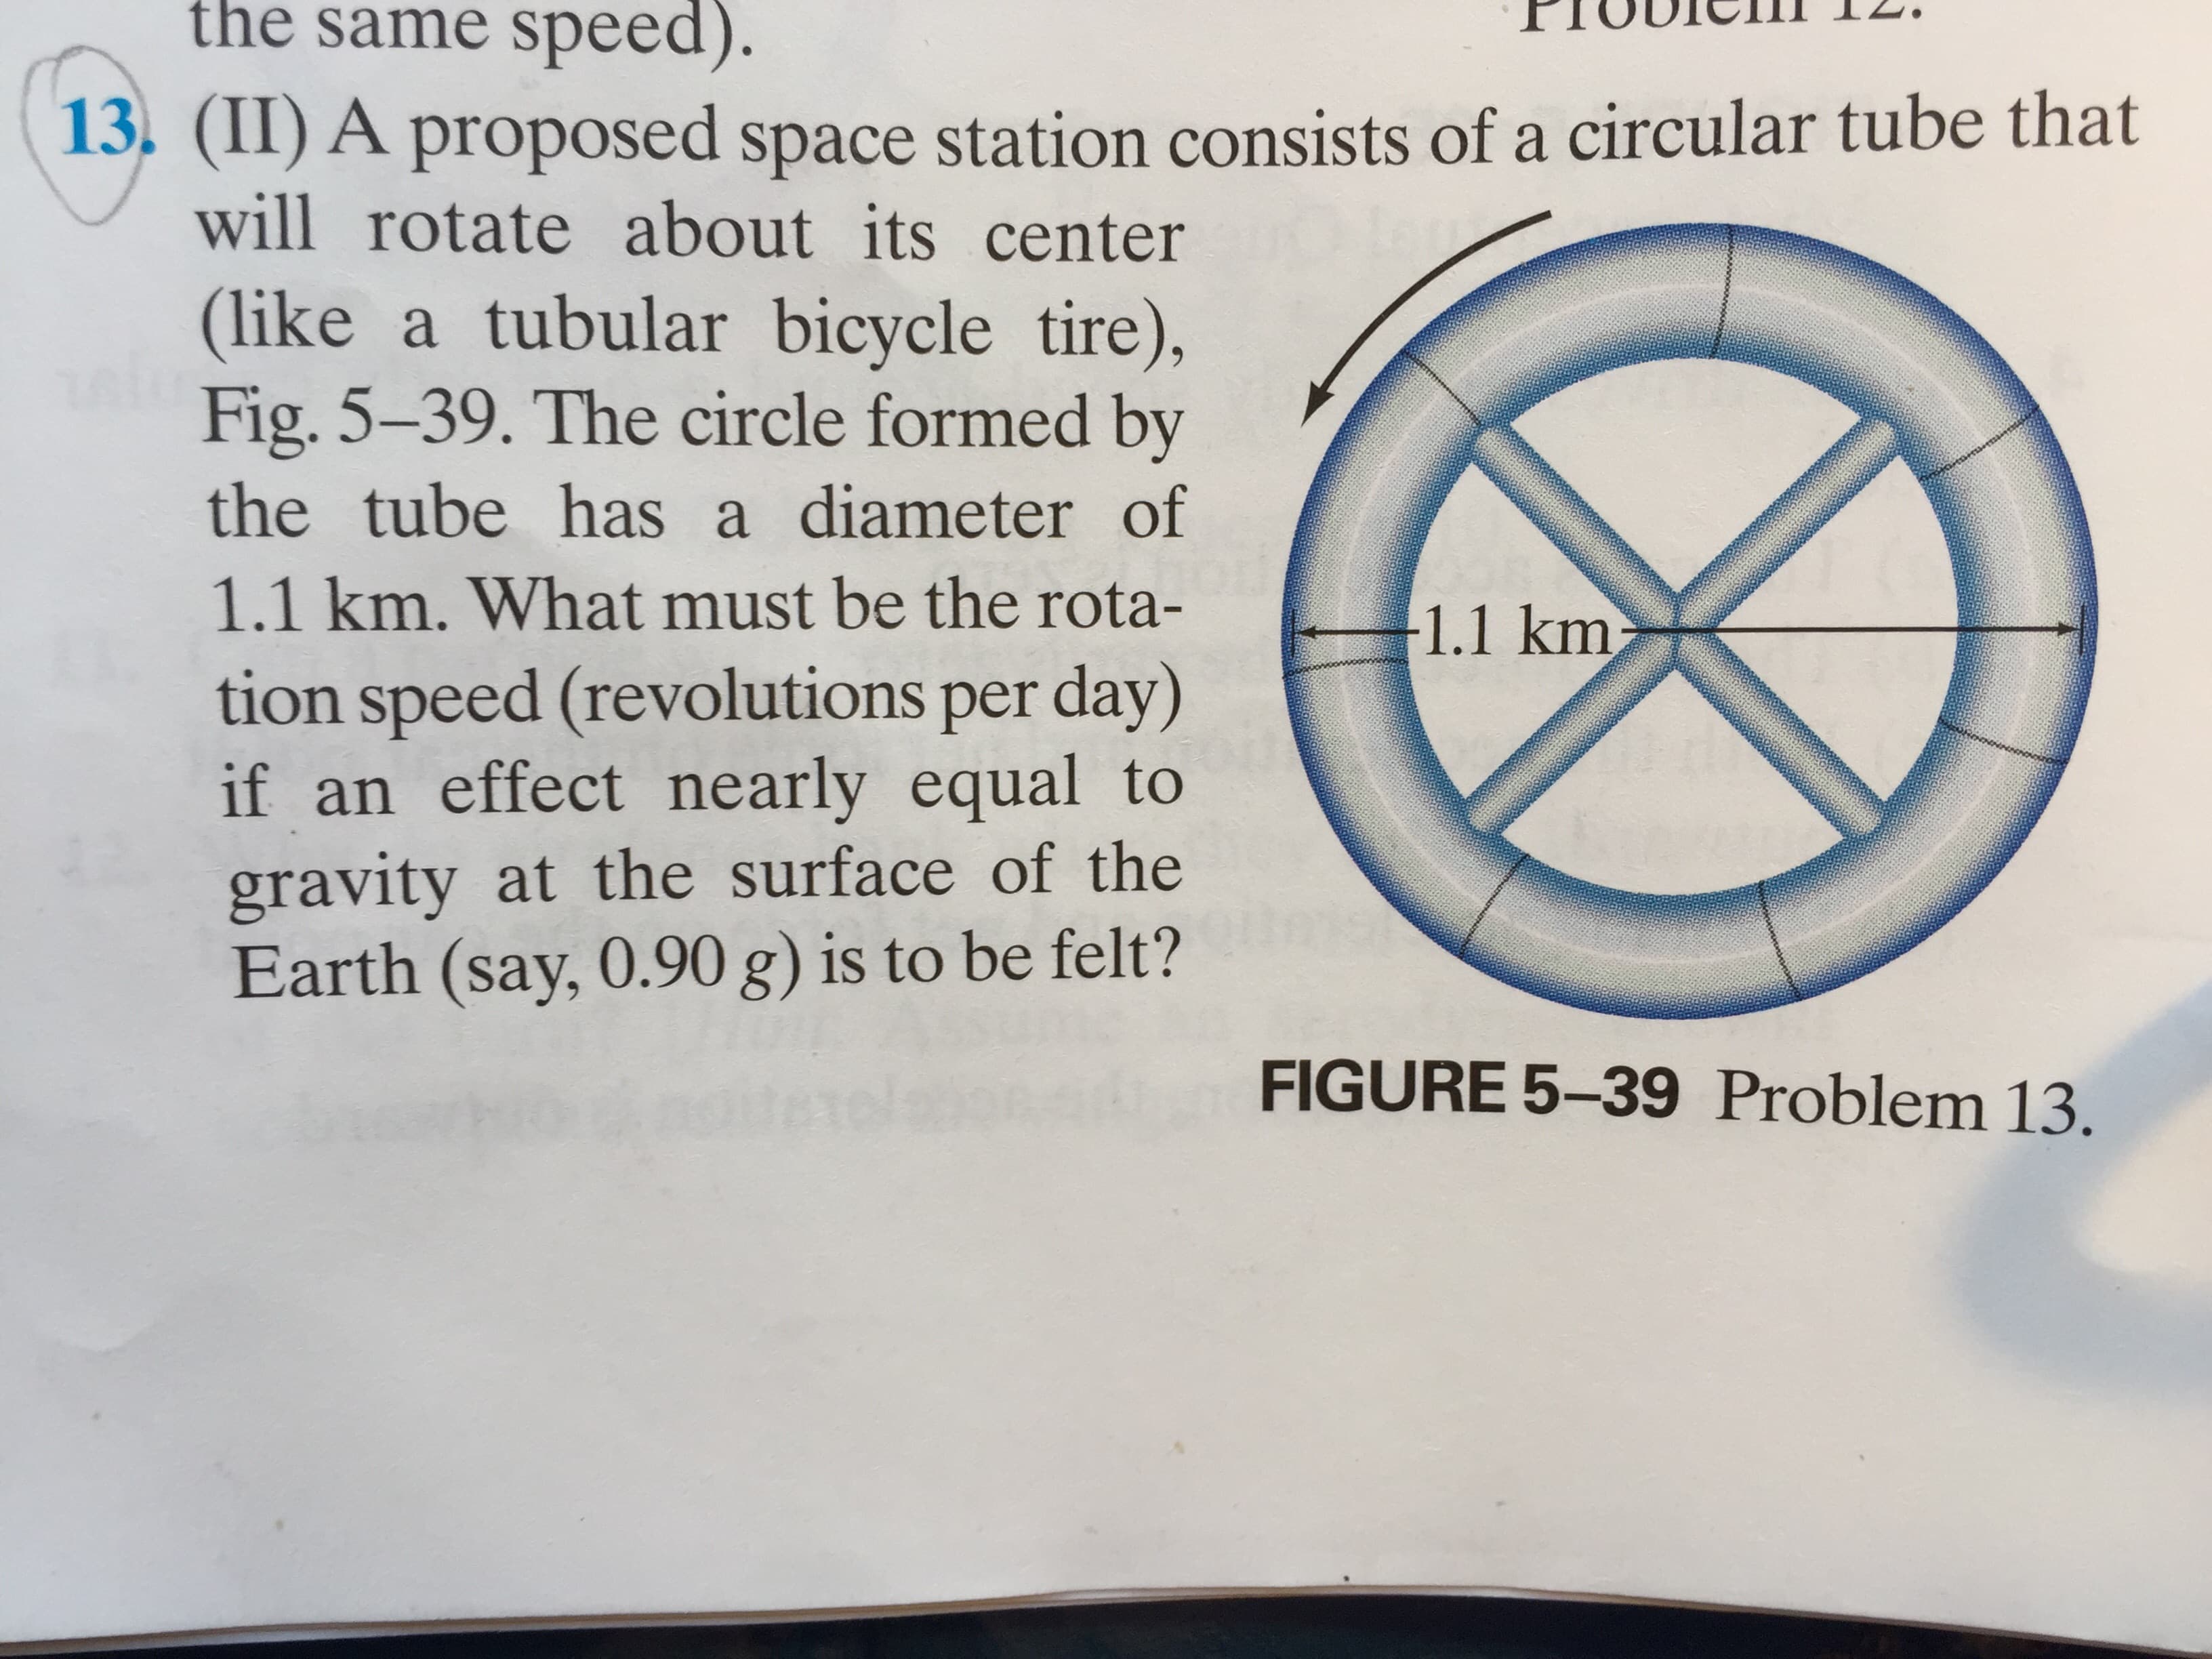 the same speed).
13. (II) A proposed space station consists ofa circular tube that
will rotate about its center
(like a tubular bicycle tire),
Fig. 5-39. The circle formed by
the tube has a diameter of
1.1 km. What must be the rota-
1.1 km
tion speed (revolutions per day)
if an effect nearly equal to
gravity at the surface of the
Earth (say, 0.90 g) is to be felt?
FIGURE 5-39 Problem 13.
